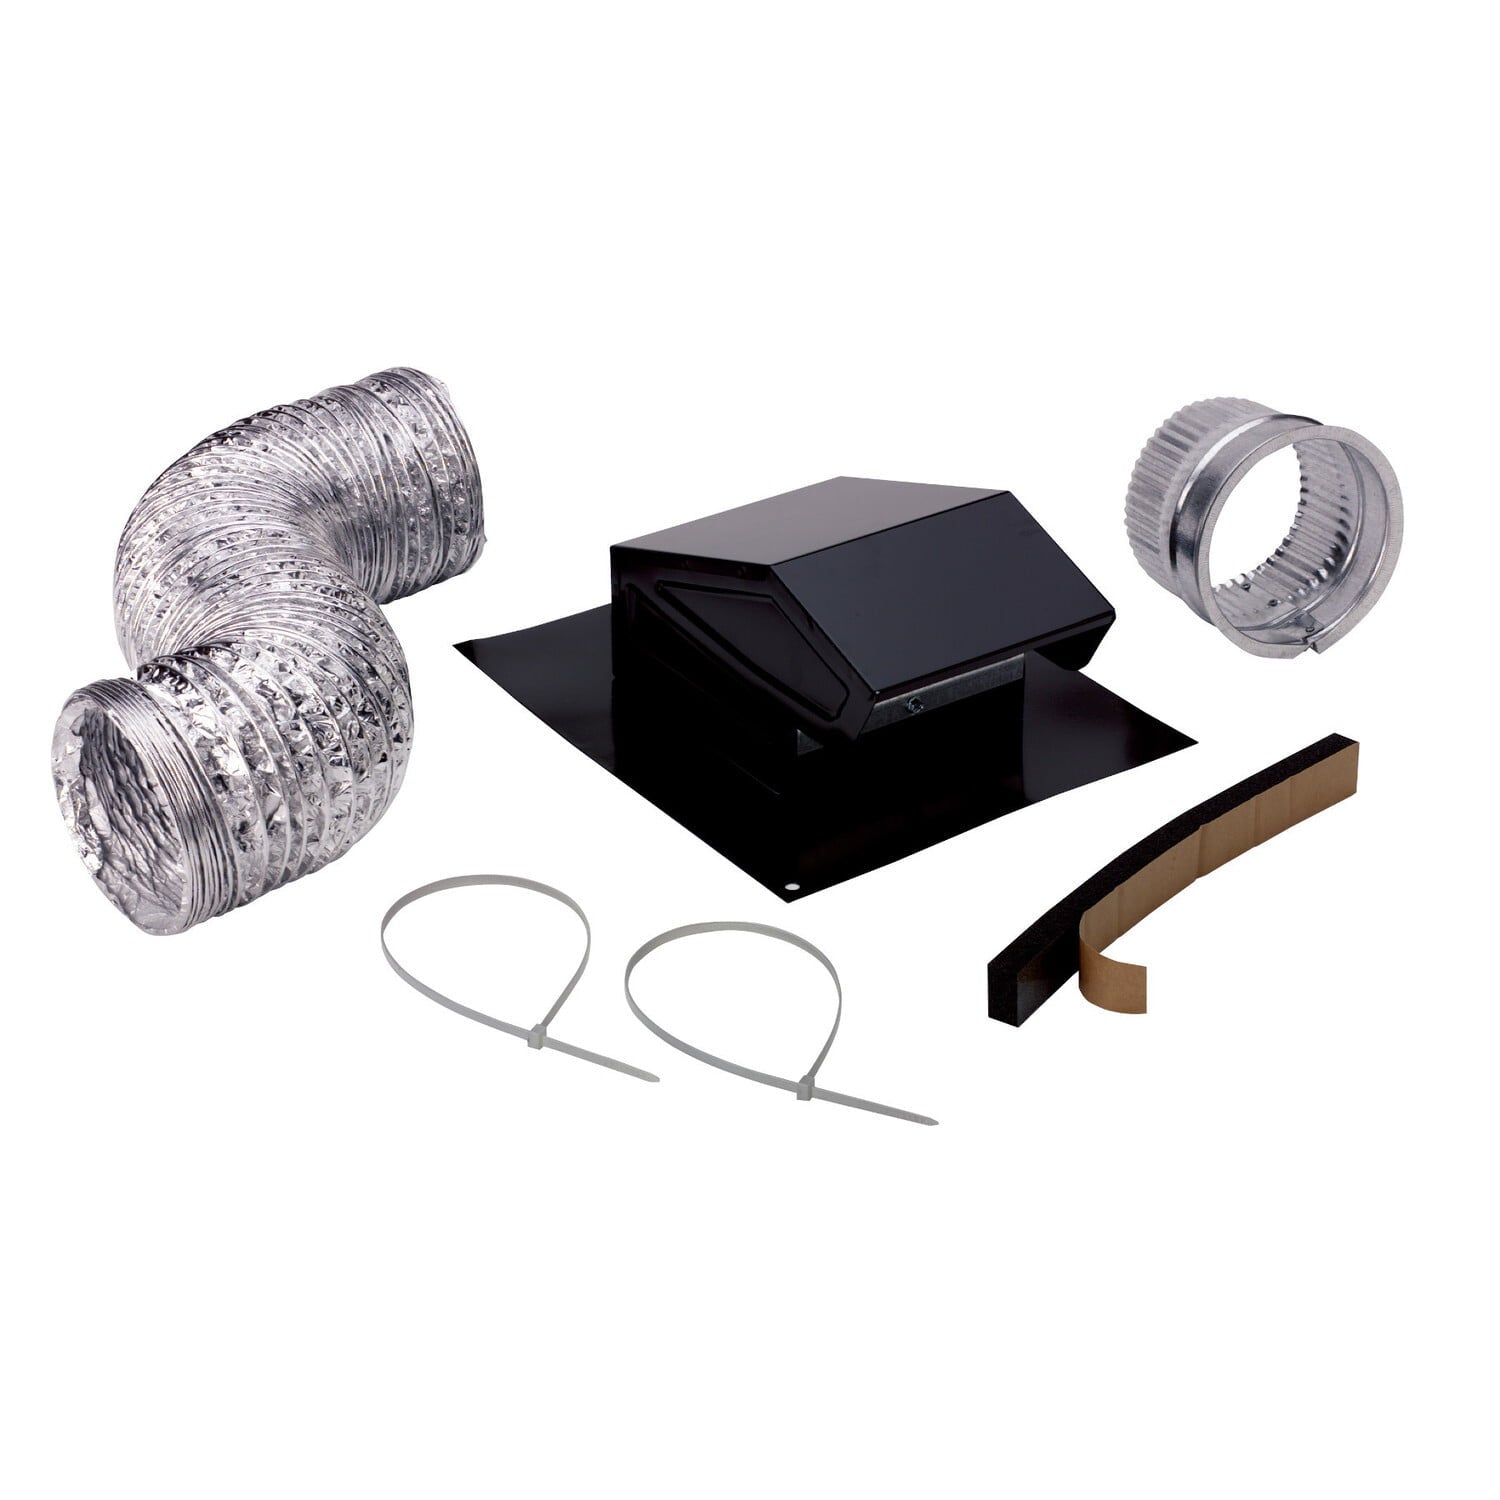 Broan RVK1A Broan® Roof Vent Kit, 8-Foot Of 4-Inch Flexible Aluminum Duct.